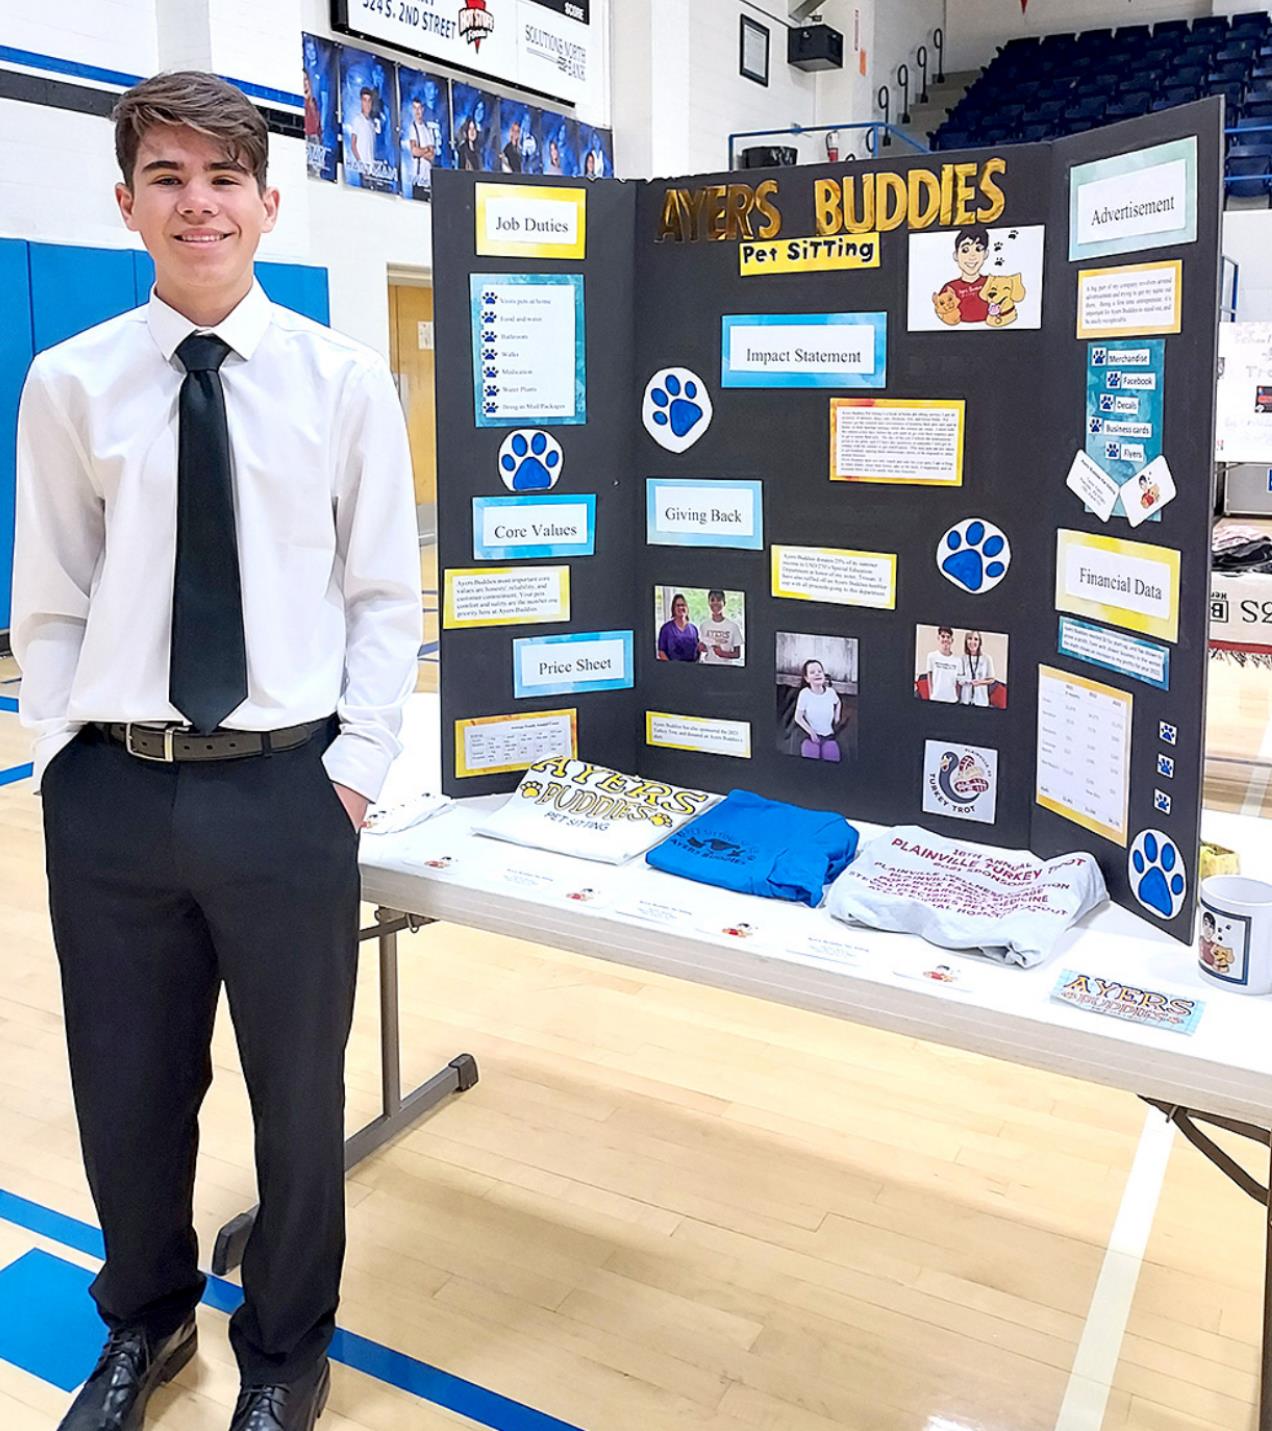 TAYLOR AYERS OF PLAINVILLE was this year’s Youth Entrepreneurship Challenge winner with his business concept, “Ayers Buddies Pet Sitting.” He also won the Best Marketing Award as well as the John McIntyre Teamwork Award. Taylor is now eligible for the State YEC to be held in Manhattan on Thursday, April 28th.